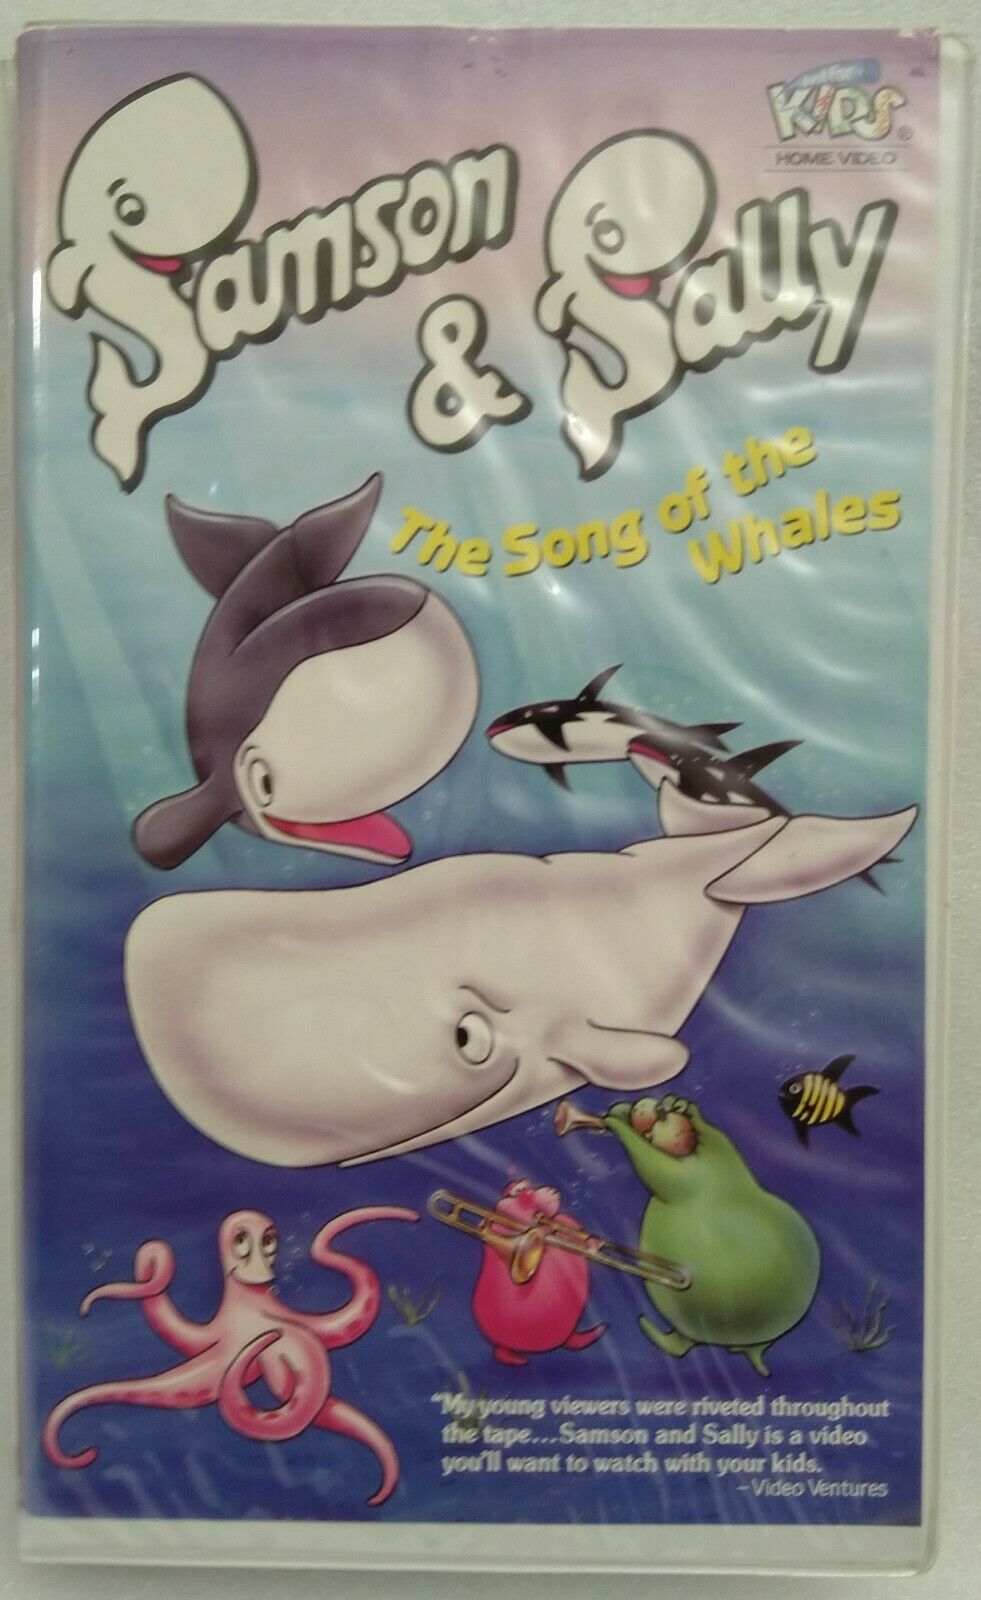 VHS Samson and Sally - The Song of the Whales (VHS, 1995) - VHS Tapes